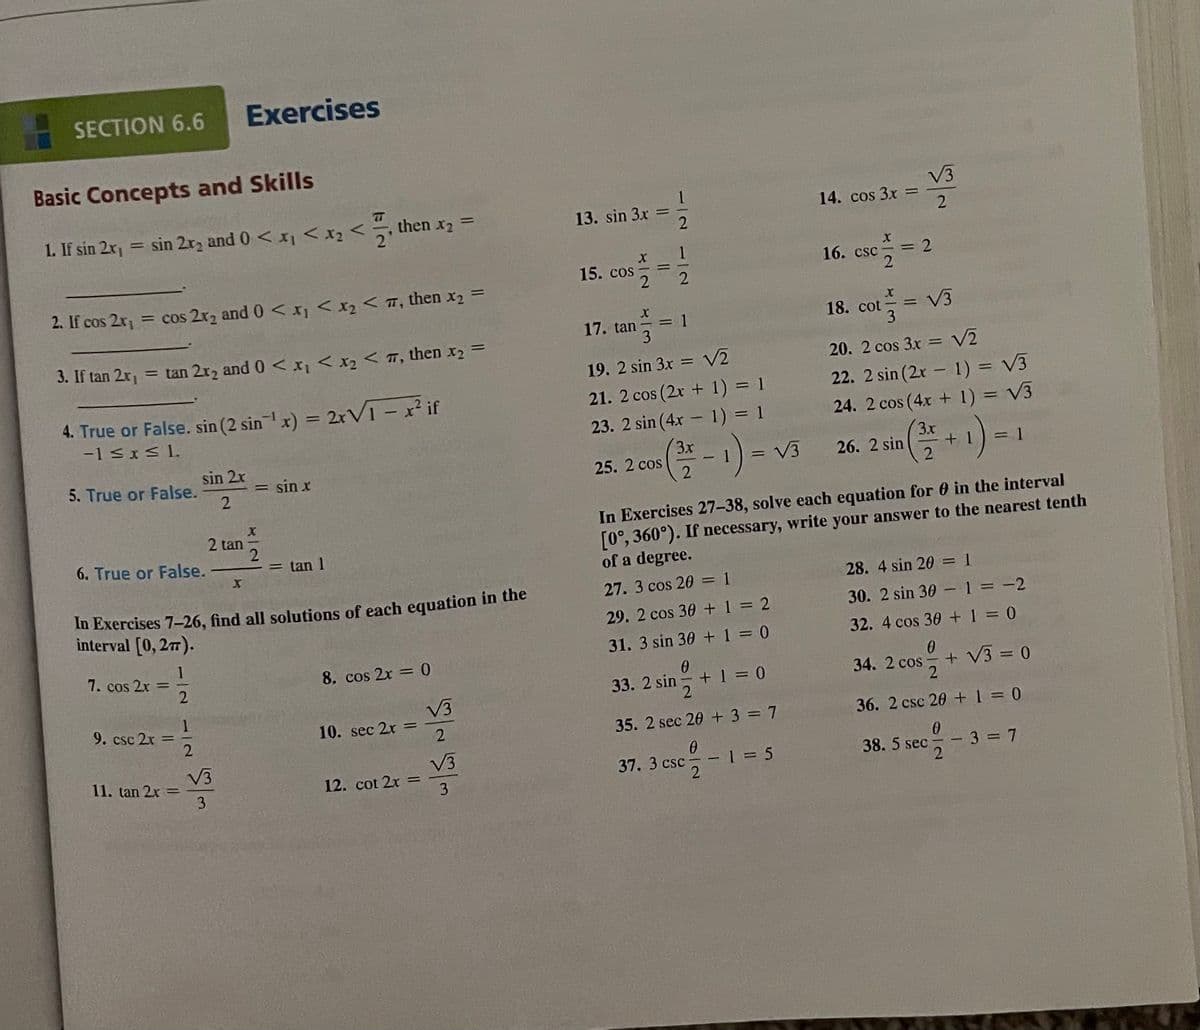 SECTION 6.6
Exercises
Basic Concepts and Skills
< then x2 =
V3
14. cos 3x =
2
1. If sin 2x1
= sin 2r2 and 0 < <x2 <
13. sin 3x
16. csc
%3D
15. cos
2
%3D
2. If cos 2r, = cos 2r2 and 0 < xj <x2 < T, then x2
18. cot= V3
17. tan
= 1
3. If tan 2r = tan 2r2 and 0 <x < x2 < T, then x2 =
19. 2 sin 3x = V2
20. 2 cos 3x = V2
%3D
4. True or False. sin (2 sinx) = 2rVI - x²if
-1 SxS 1.
22. 2 sin (2x - 1) = V3
24. 2 cos (4x + 1) = V3
21. 2 cos (2x + 1) = 1
%3D
23. 2 sin (4x - 1) = 1
3x
25. 2 cos
3x
26. 2 sin
sin 2x
5. True or False.
2
= sin x
= V3
= 1
In Exercises 27–38, solve each equation for 0 in the interval
[0°, 360°). If necessary, write your answer to the nearest tenth
of a degree.
2 tan
6. True or False.
= tan 1
28. 4 sin 20 = 1
30. 2 sin 30 -1 = -2
27. 3 cos 20 = 1
In Exercises 7-26, find all solutions of each equation in the
interval [0, 27).
29. 2 cos 30 +1 = 2
31. 3 sin 30 +1 = 0
32. 4 cos 30 + 1 = 0
7. cos 2x
8. cos 2x = 0
33. 2 sin +1 = 0
34. 2 cos-
+ V3 = 0
V3
10. sec 2x =
9. csc 2x
%3D
35. 2 sec 20 + 3 = 7
36. 2 csc 20 +1 = 0
V3
11. tan 2x =
V3
12. cot 2x =
3
sec-3 = 7
37. 3 csc-
-1 = 5
38. 5 sec
3
2.
1121 2
